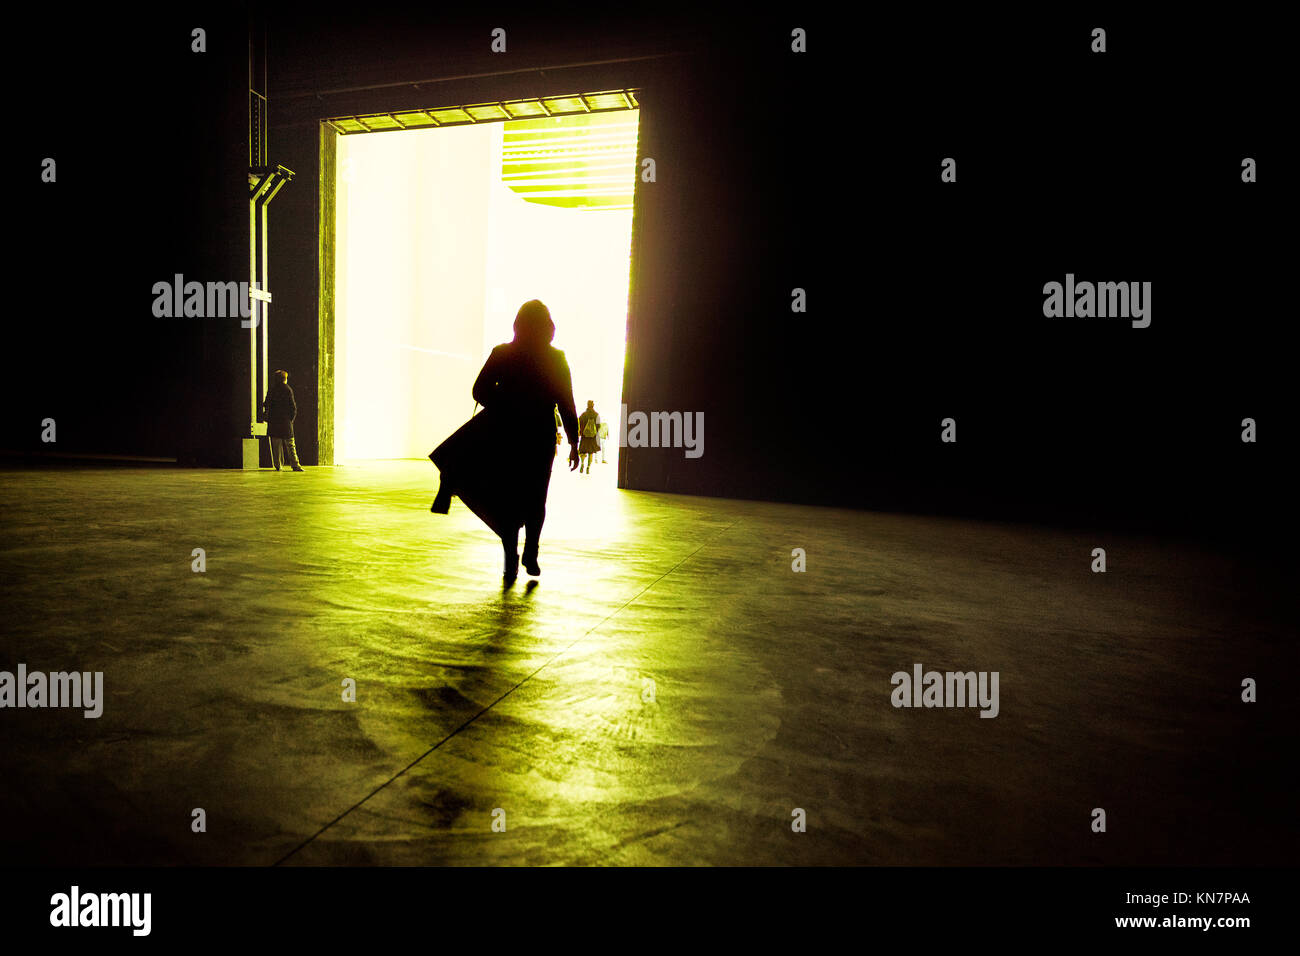 Silhouette of a business woman walking into the illuminated big room, Milano, Italy Stock Photo